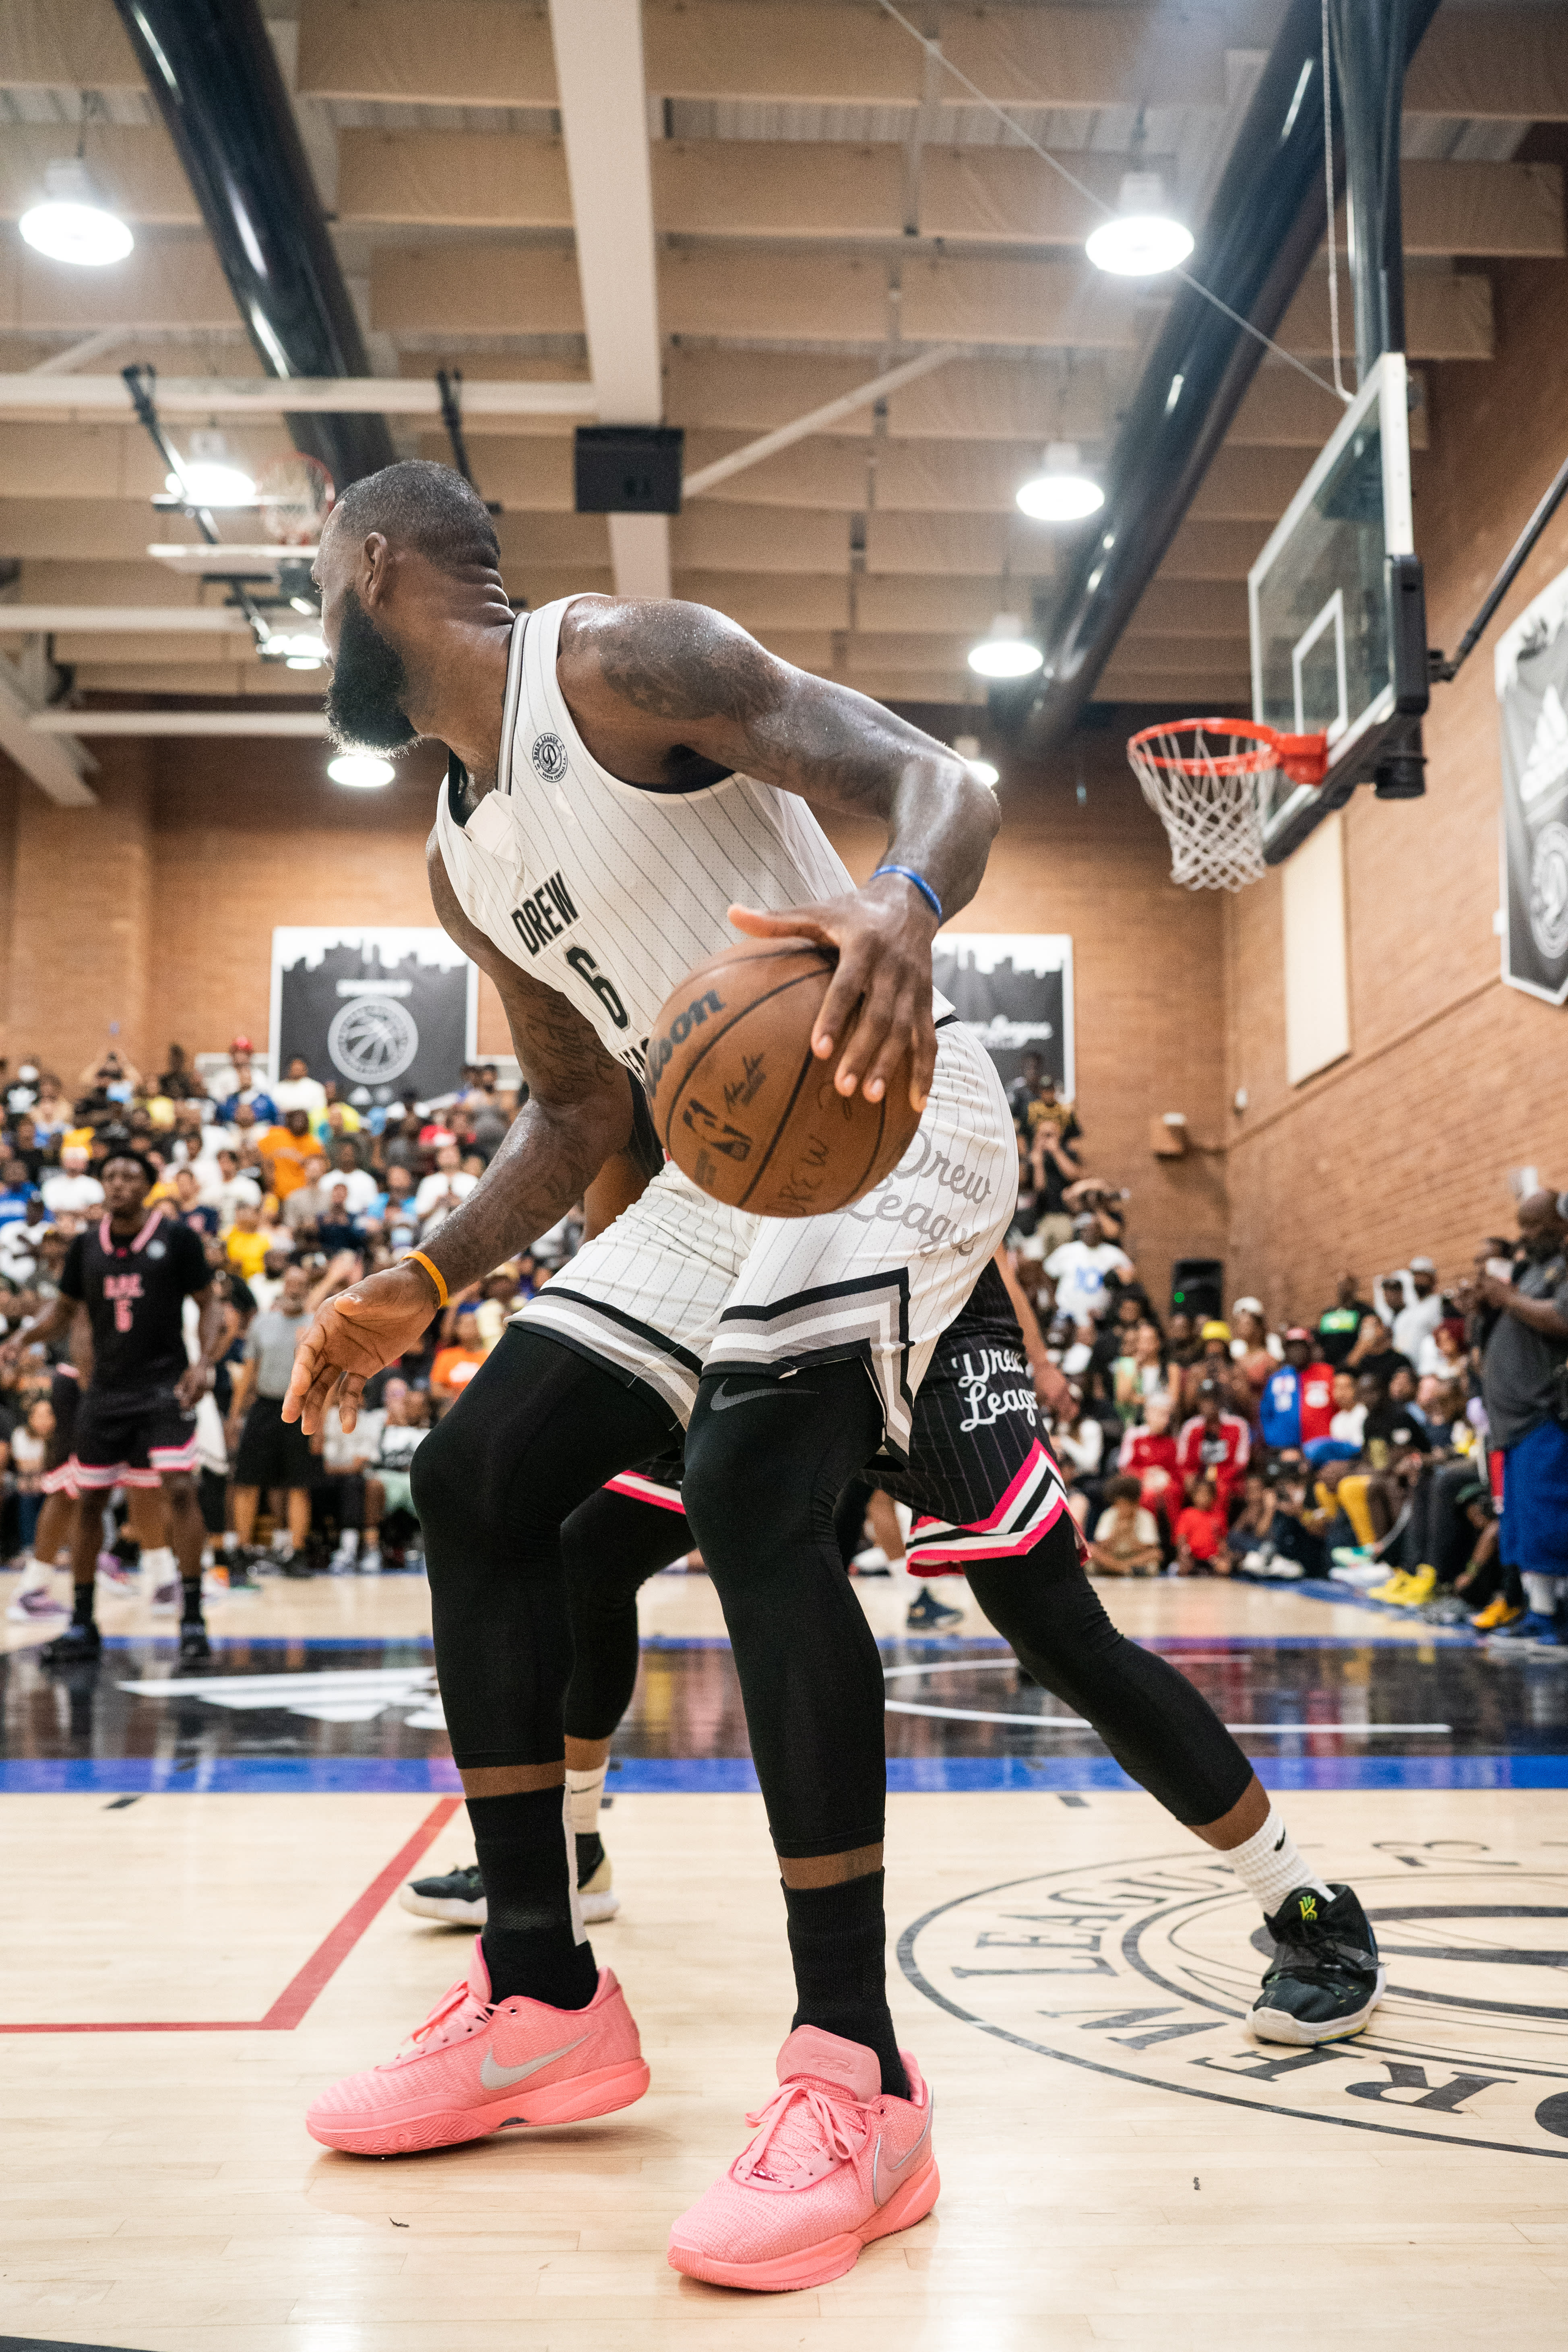 LeBron James Posts Up in Drew League July 16, 2022